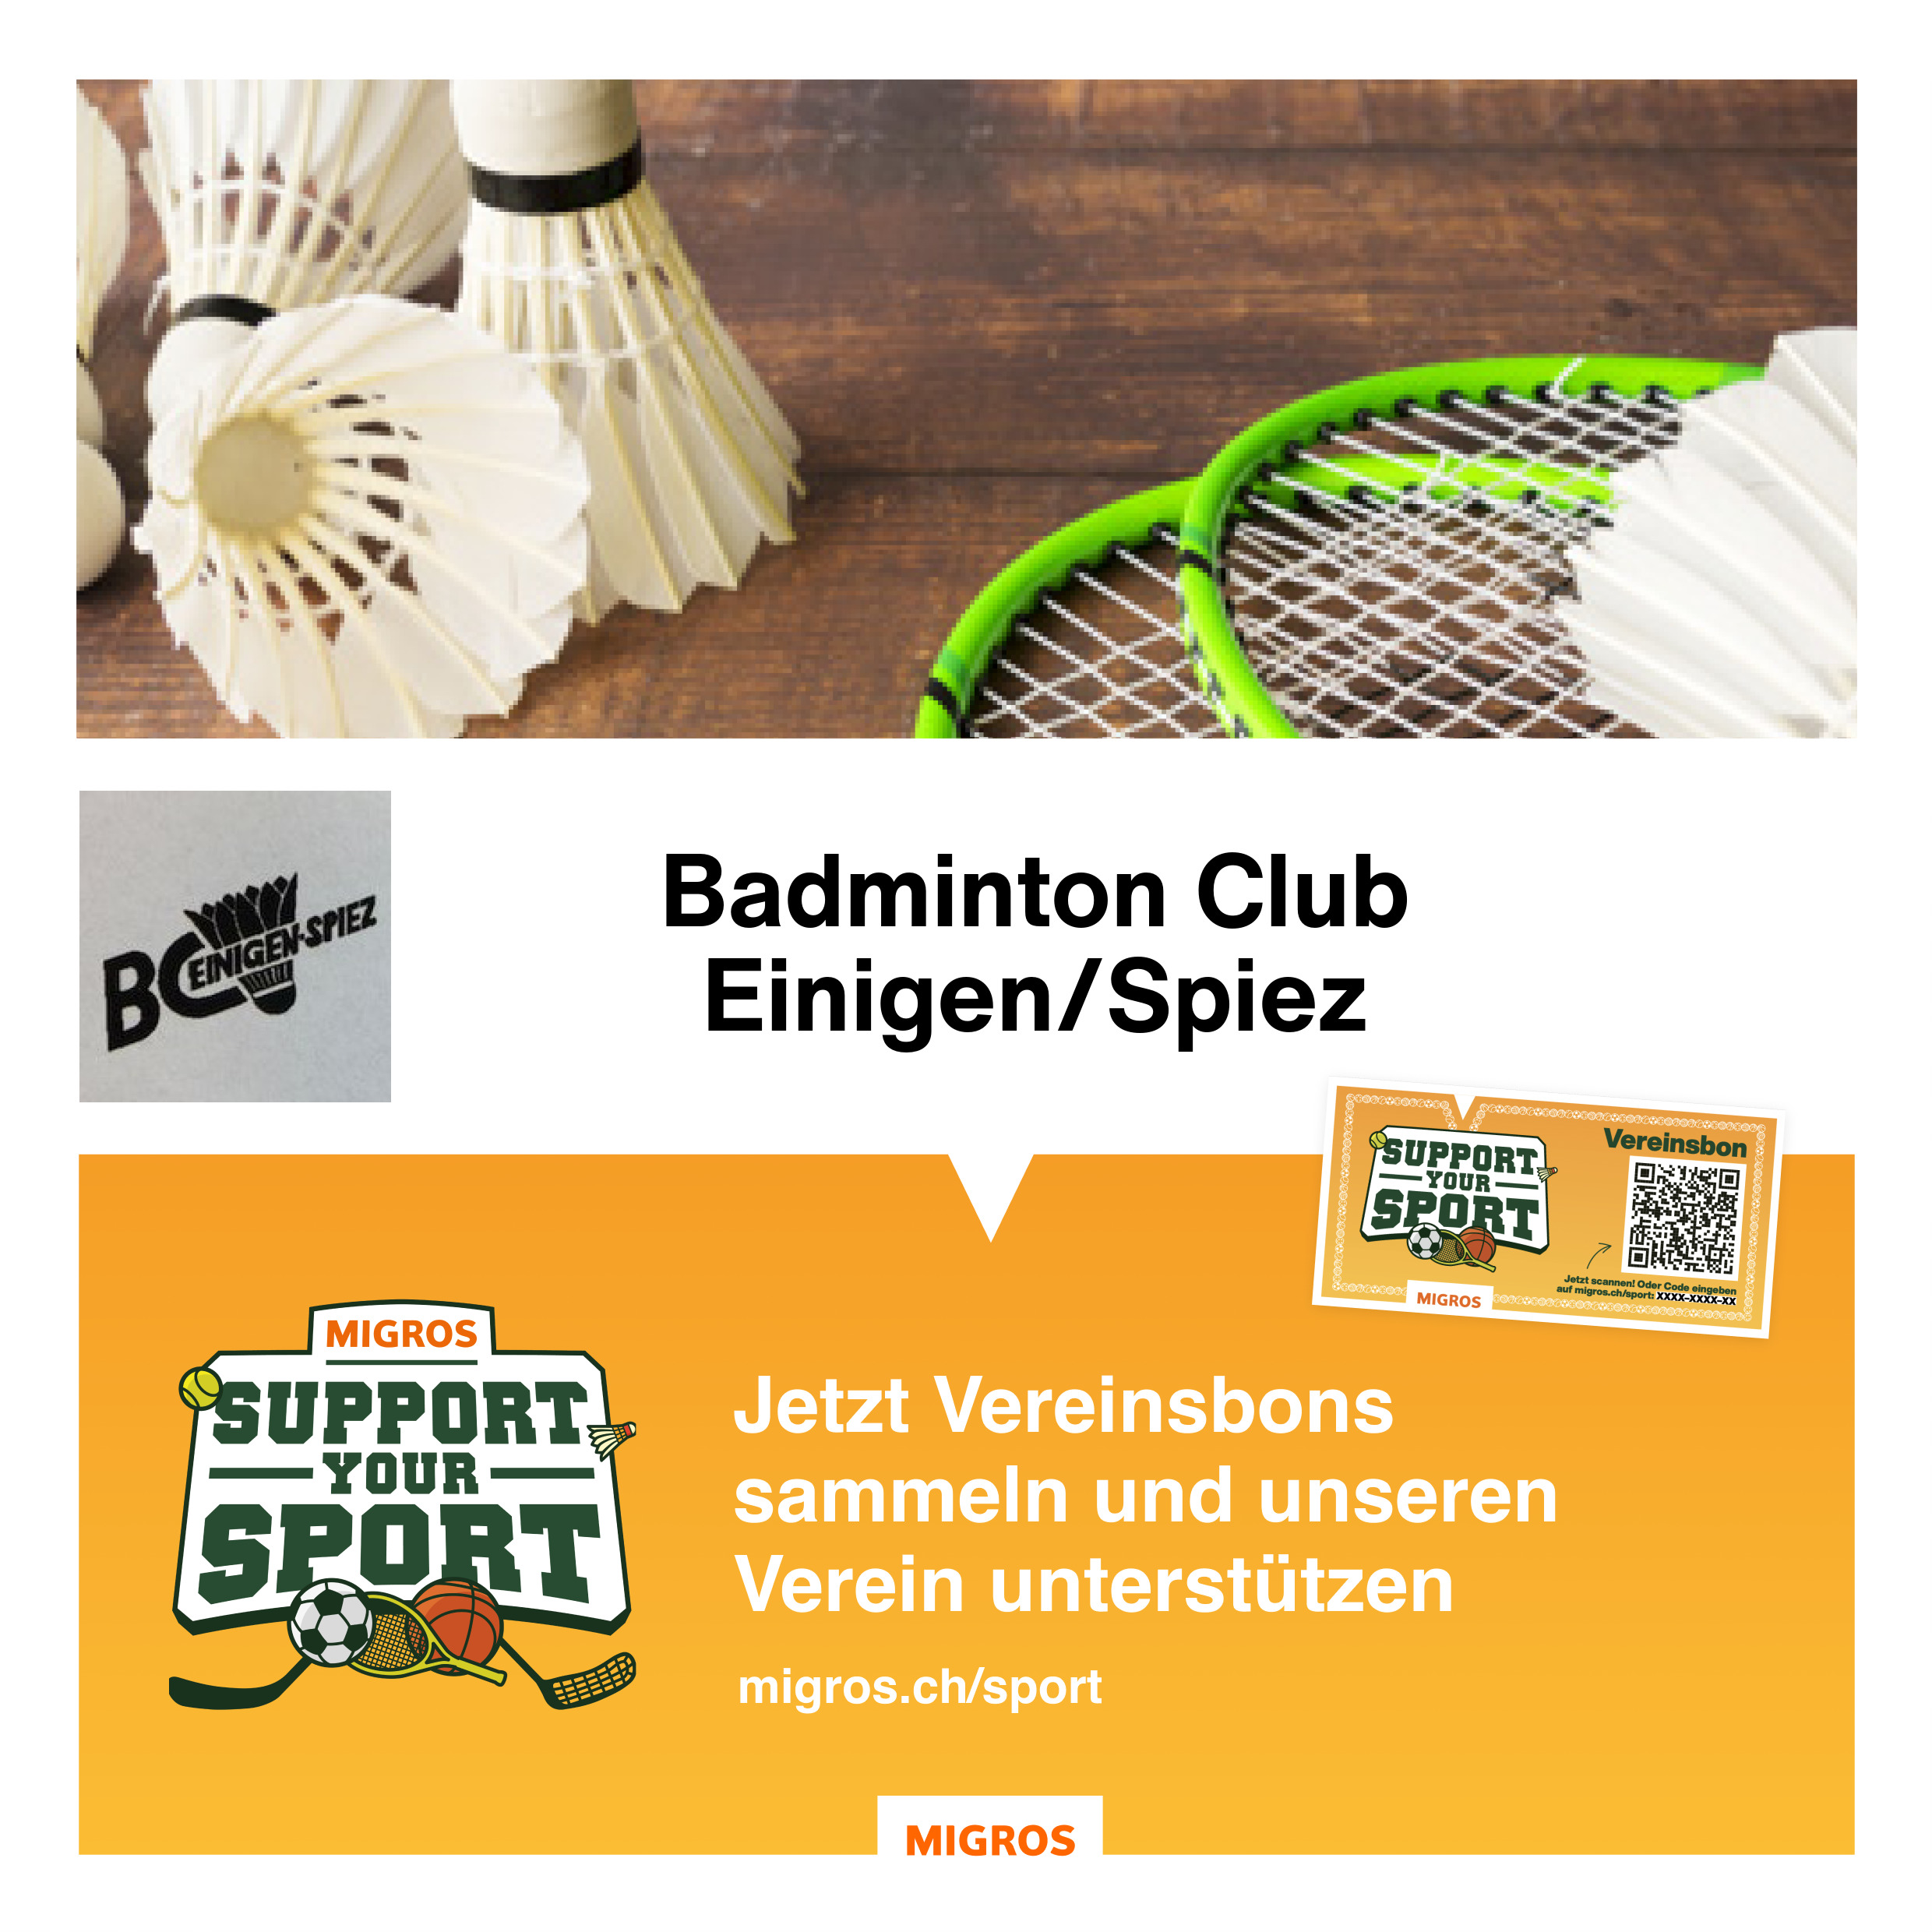 Migros - Support your Sport again